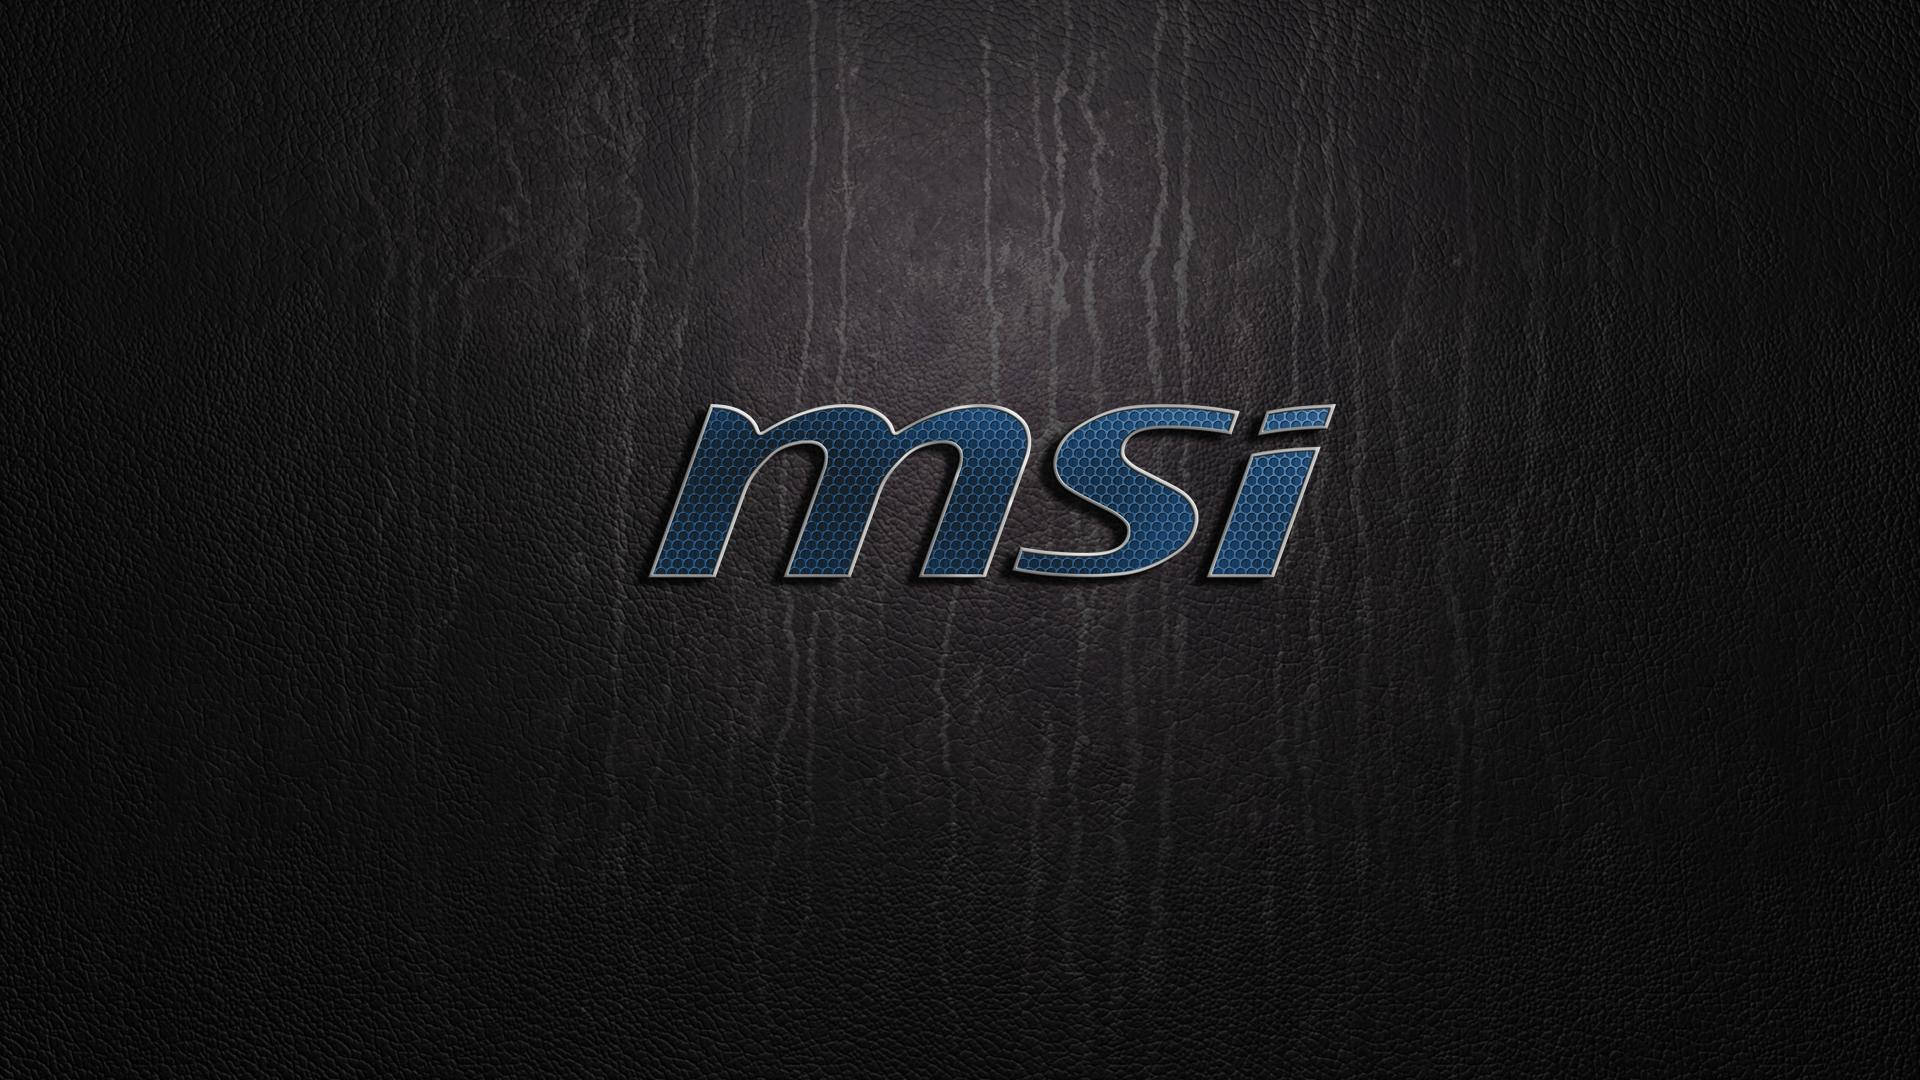 MSI - Committed to Innovation Wallpaper